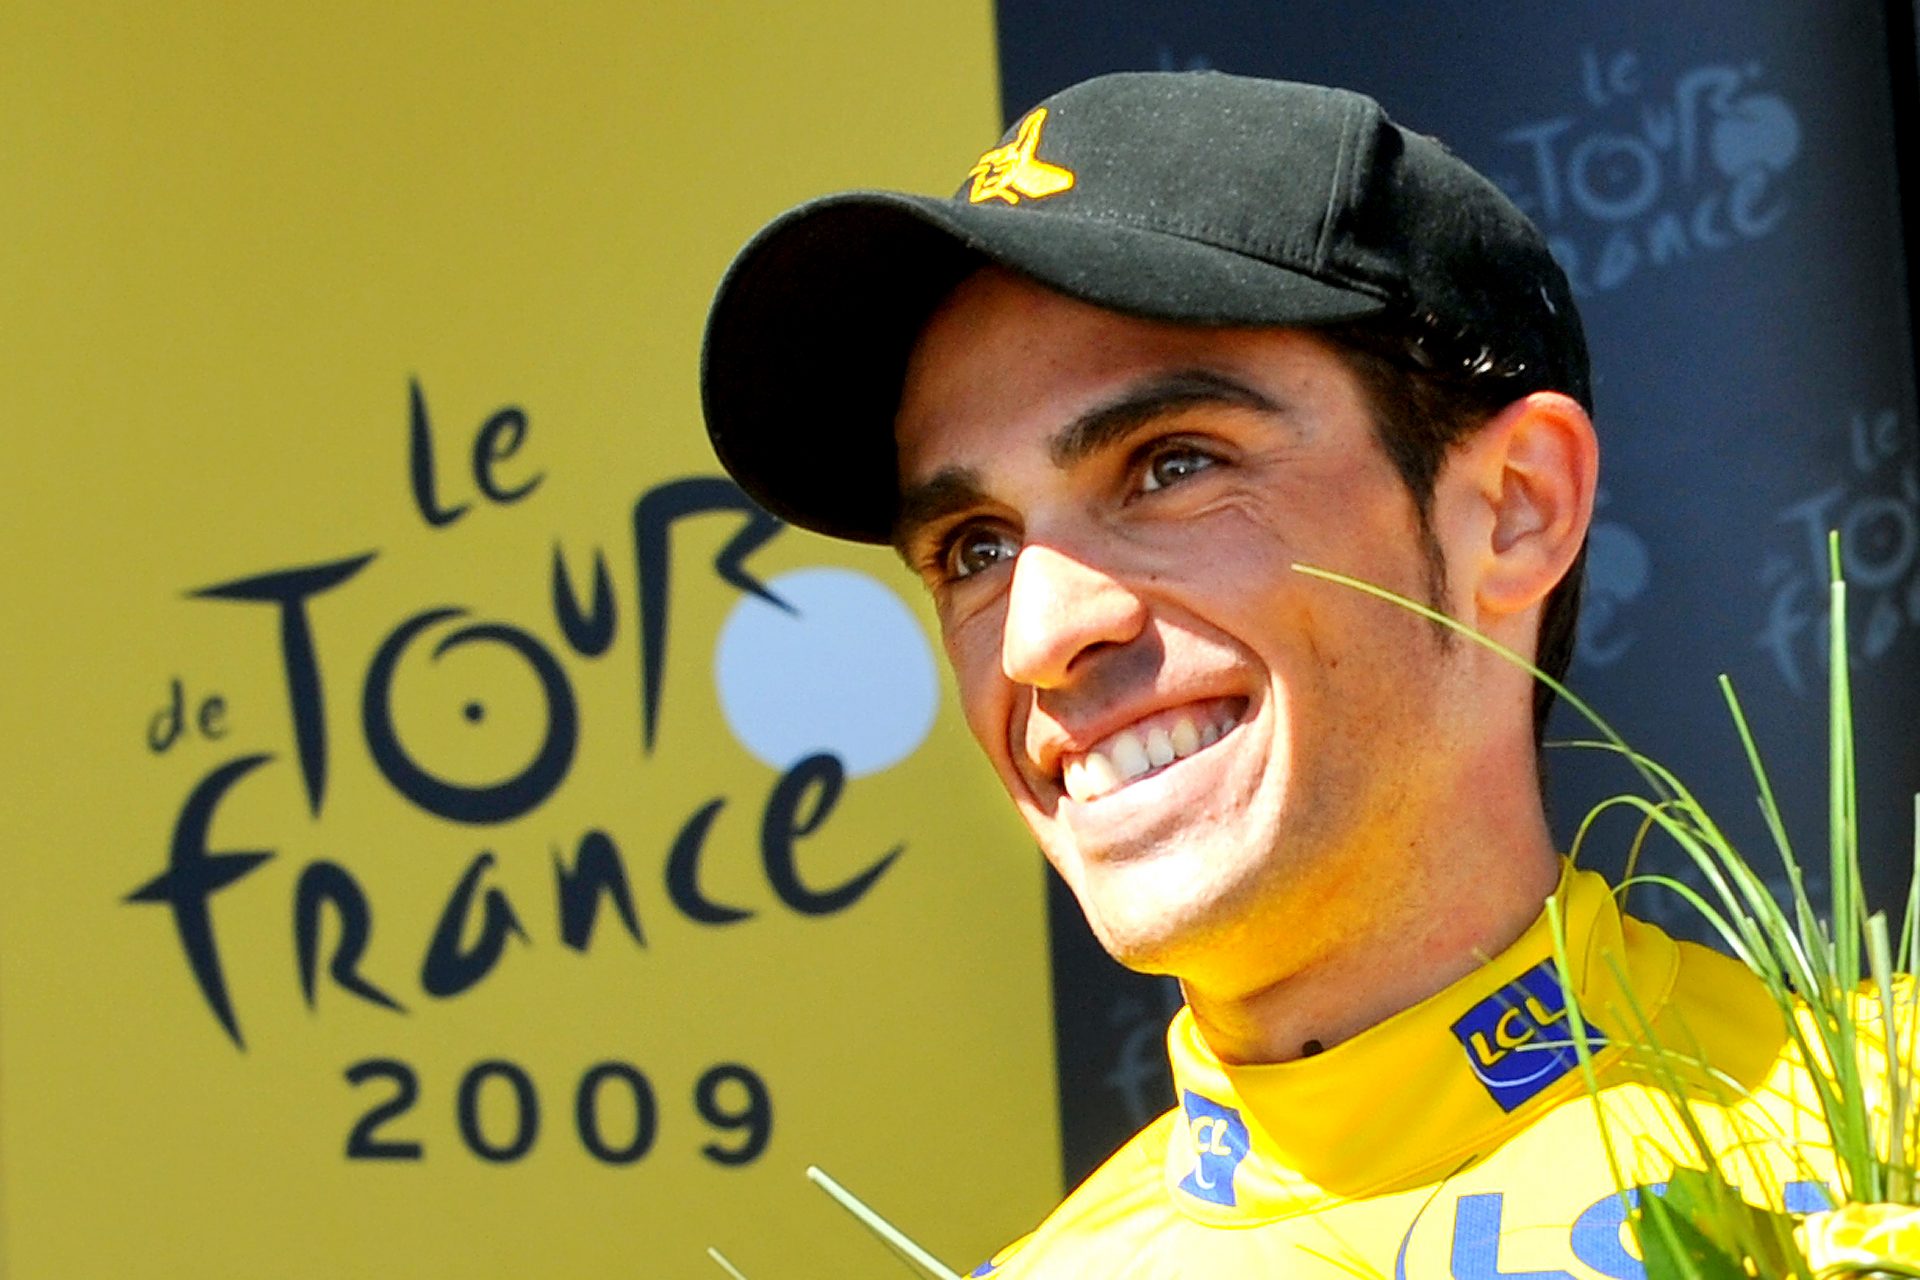 Legends of the TDF: The compelling story of Alberto Contador